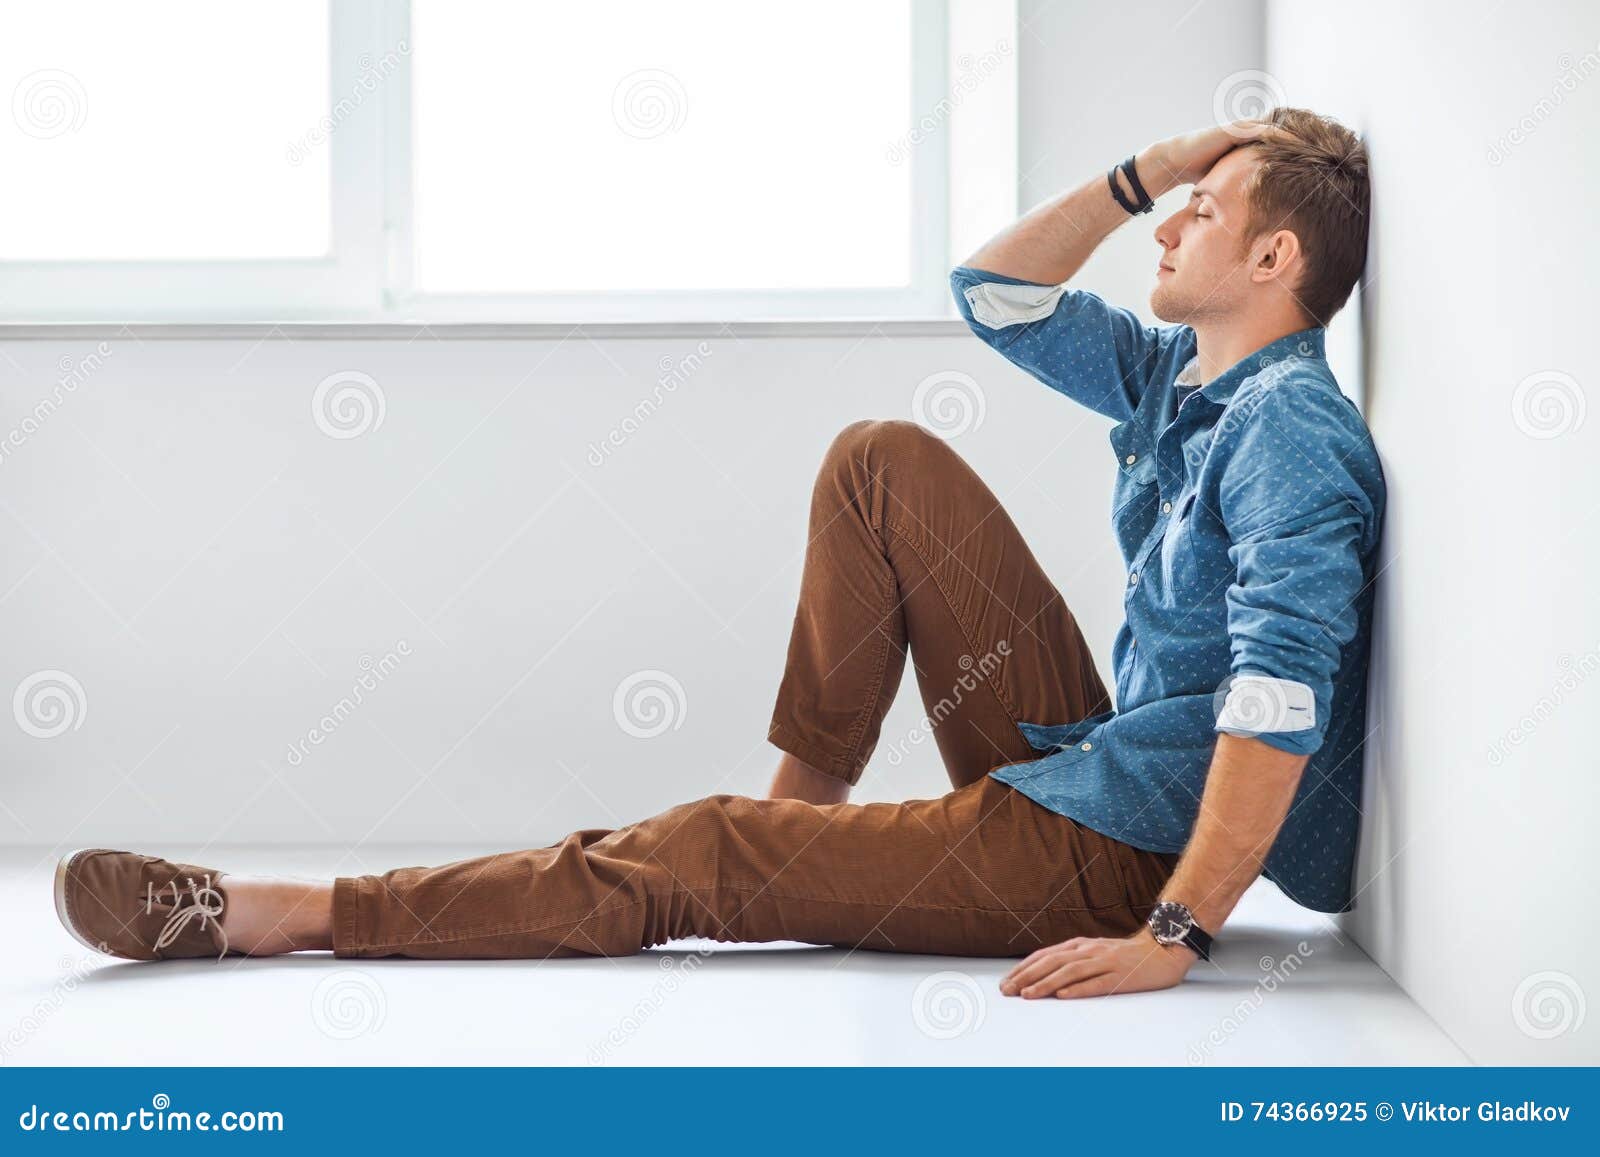 Tired Man On The Desk, Desk, Careless, Man PNG Picture And Clipart Image For Free Download ...